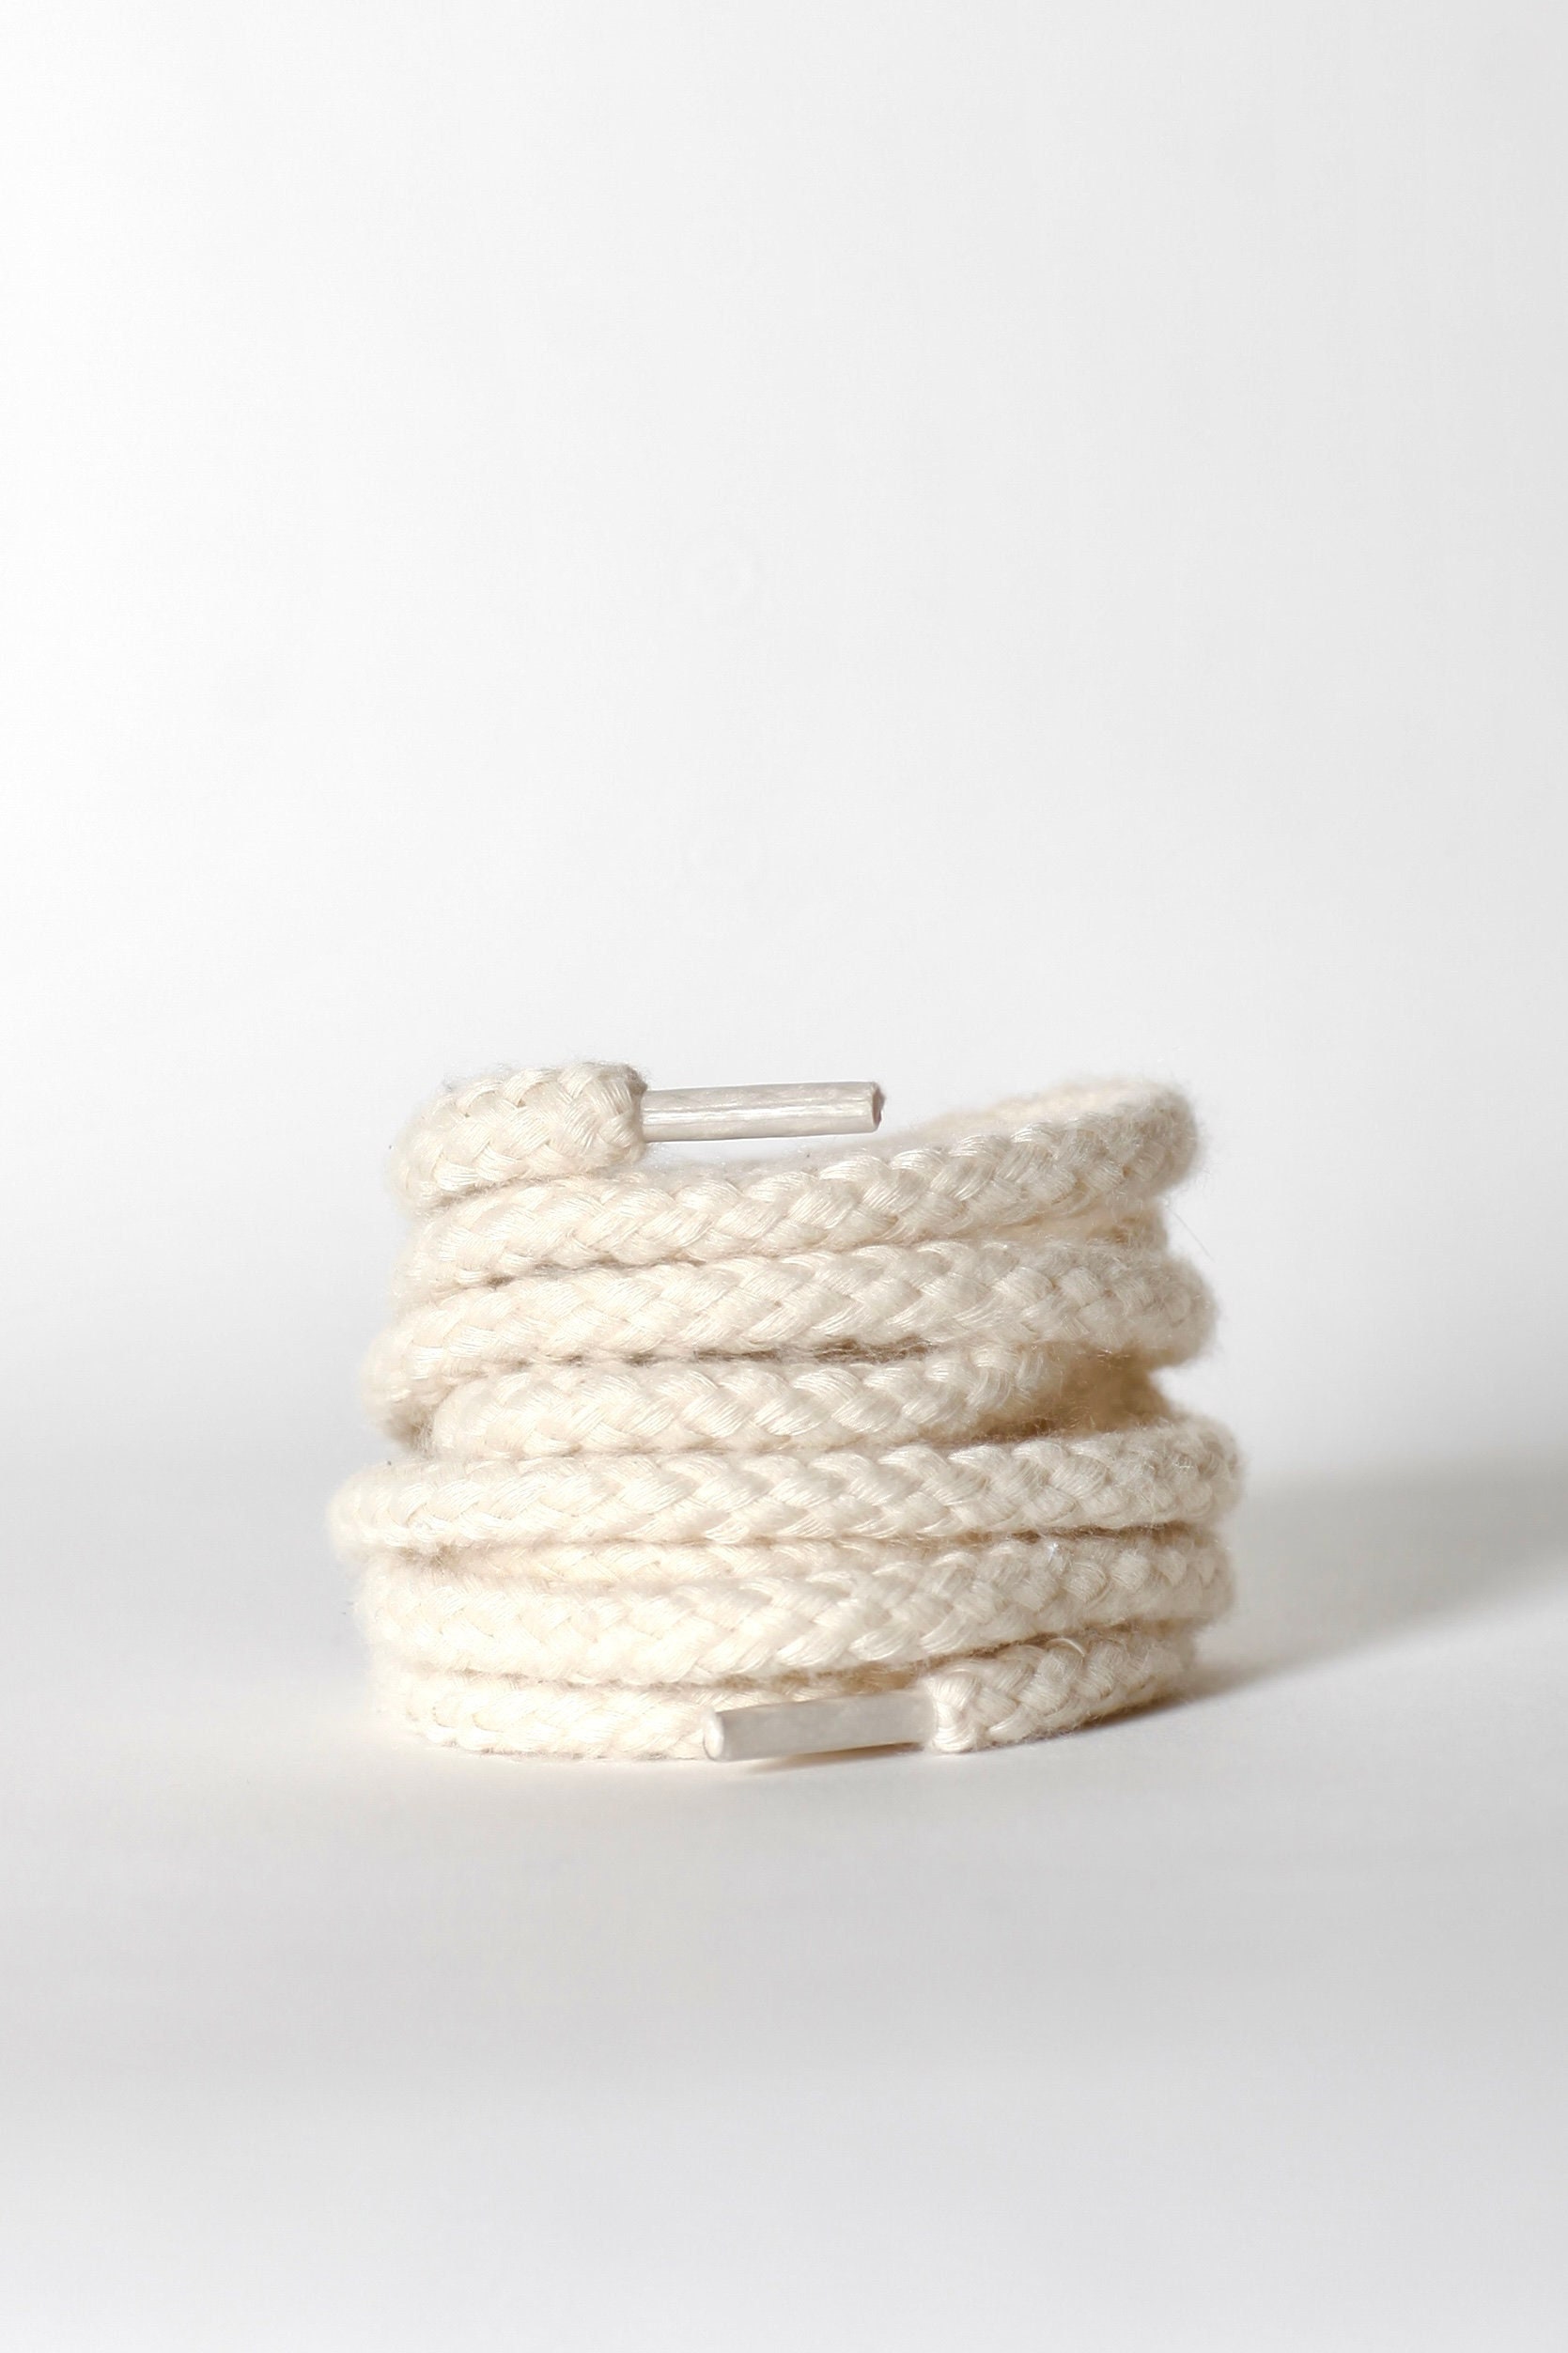 Grey/White Rope Laces – Sneaks & Laces